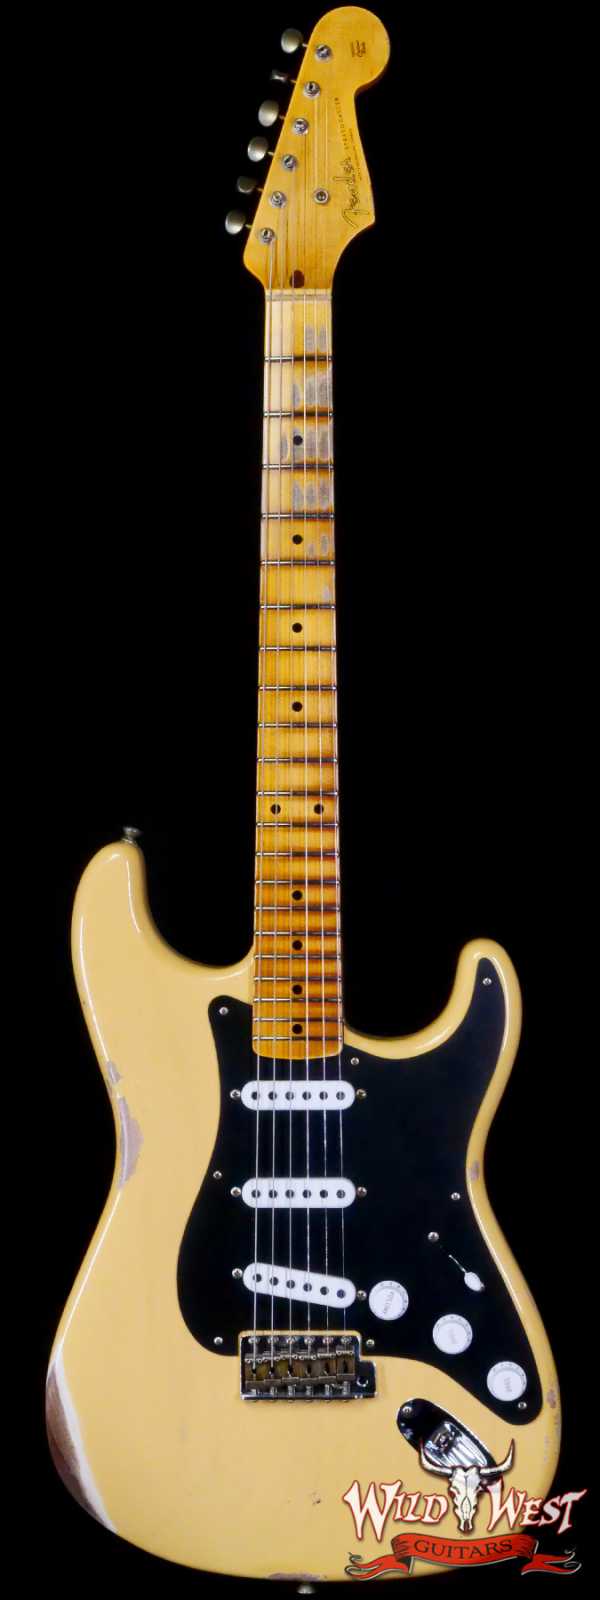 Fender Custom Shop Limited Edition 70th Anniversary 1954 Stratocaster Relic Nocaster Blonde with Black Pickguard 7.50 LBS